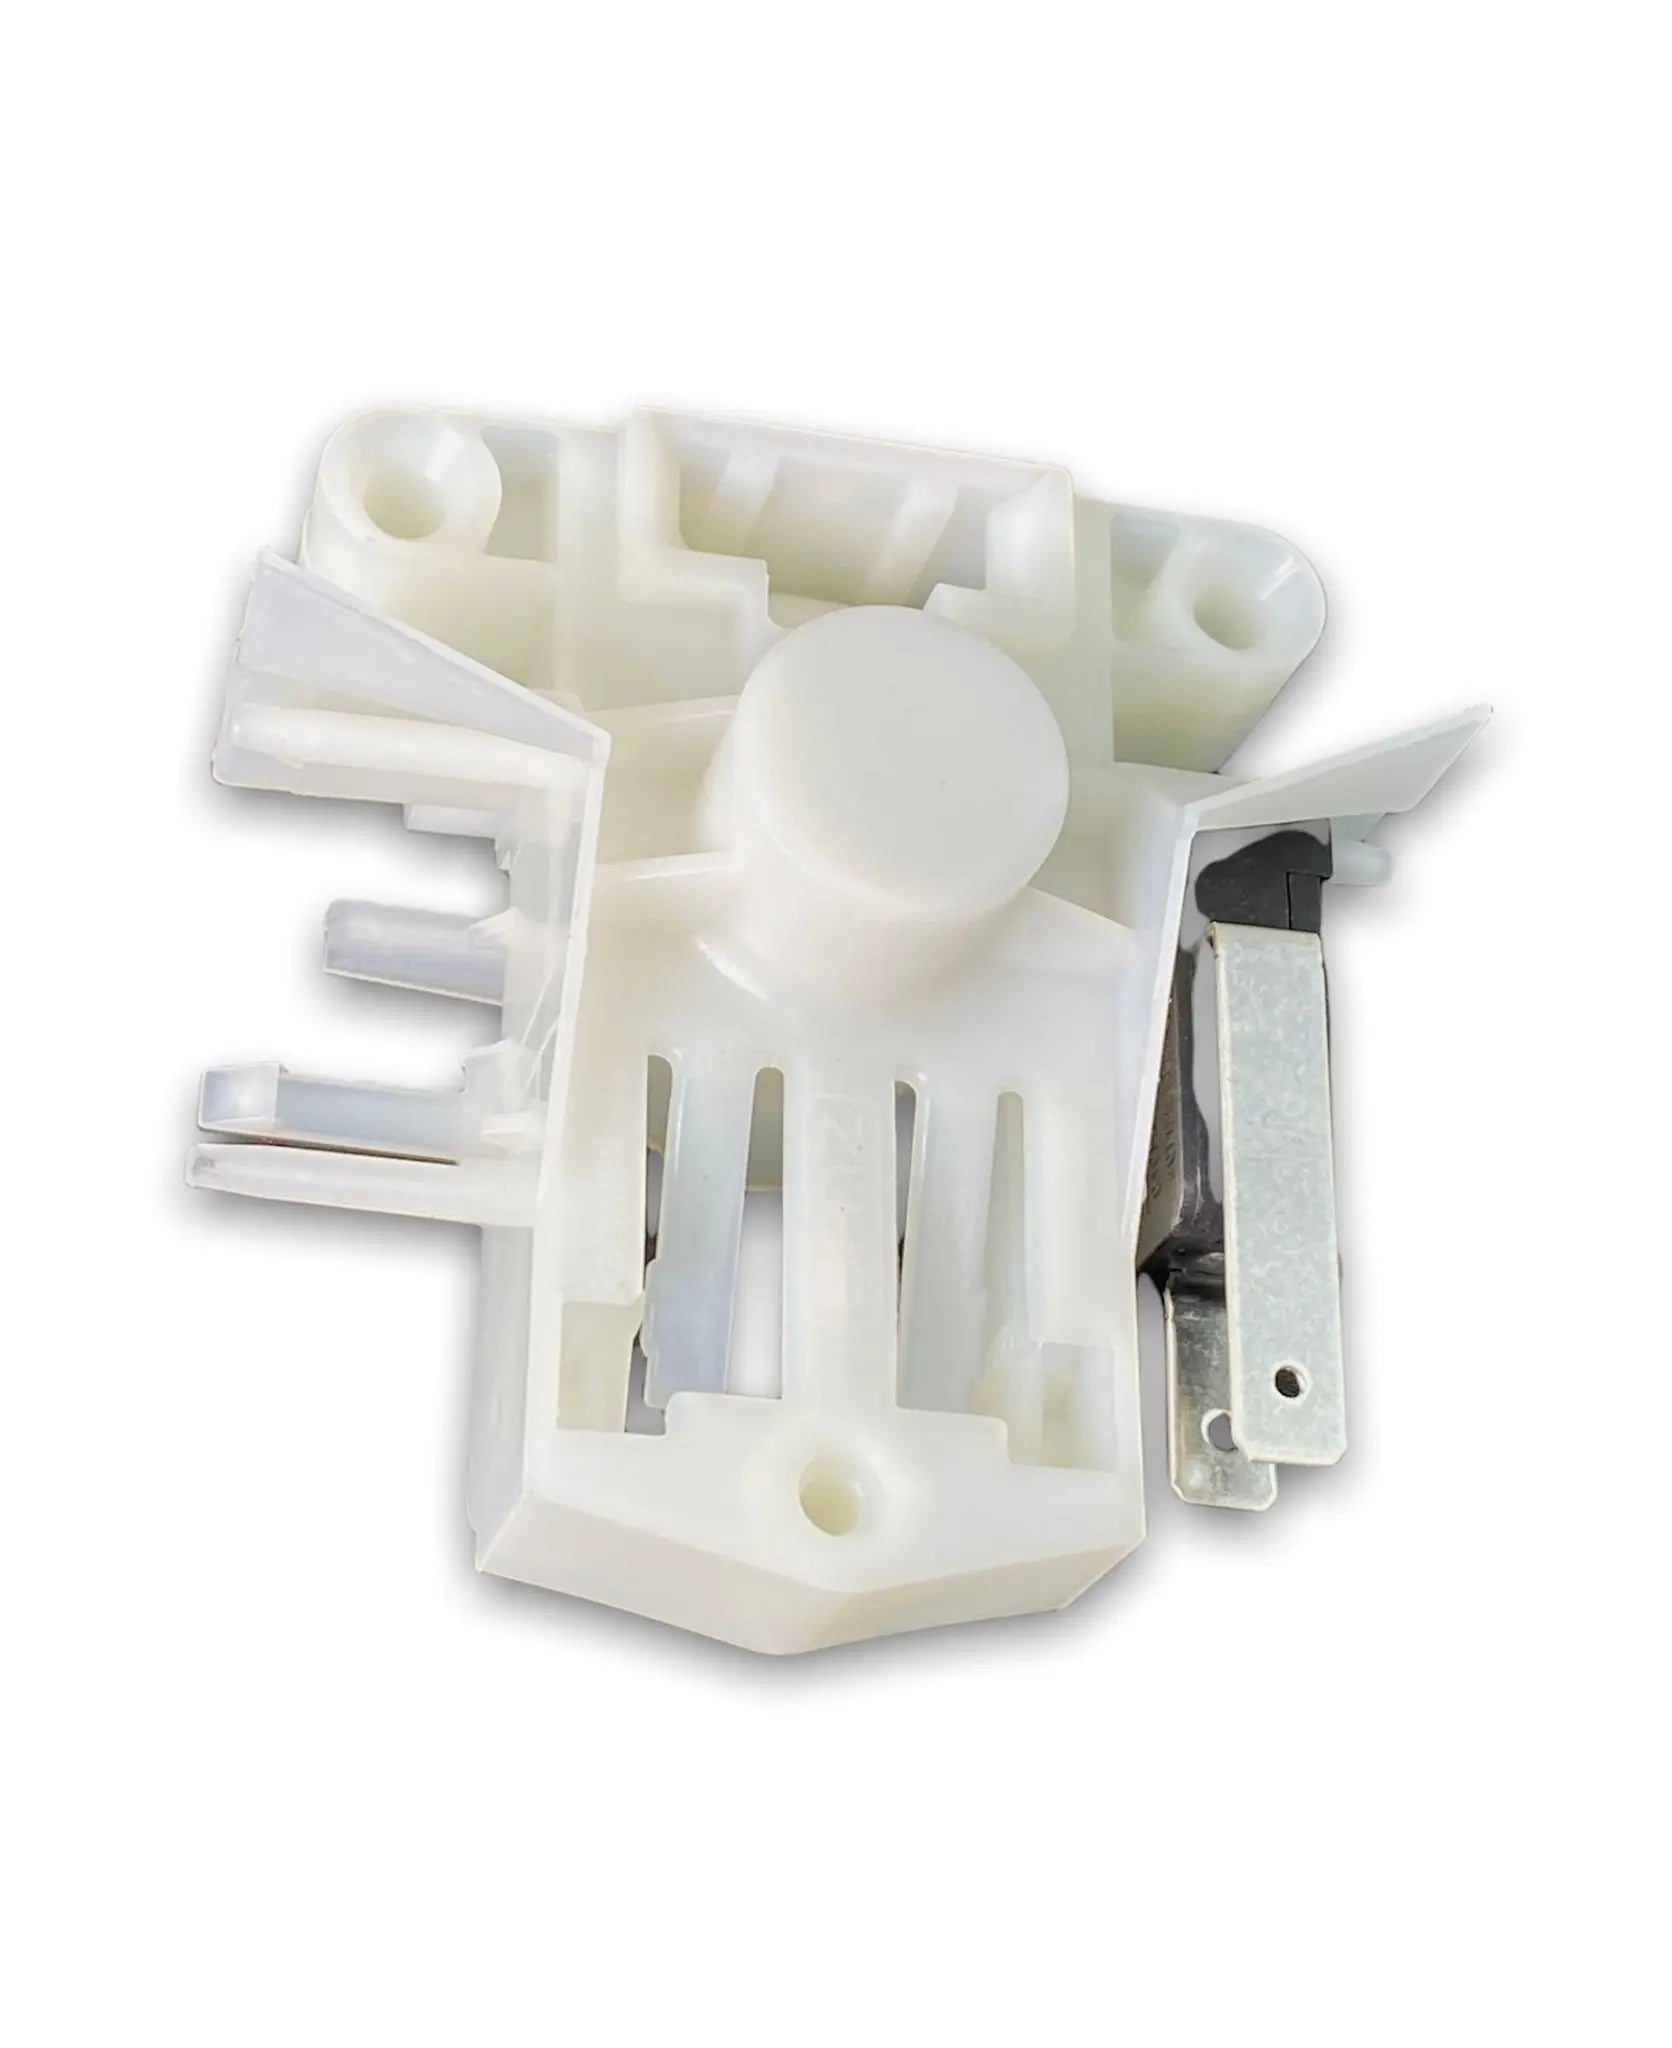 Samsung Dishwasher Door Latch /Switch - DD81-02197A or DD8102197A,  REPLACES: AP6244343 PS12085601 EAP12085601 PD00050373 INVERTEC